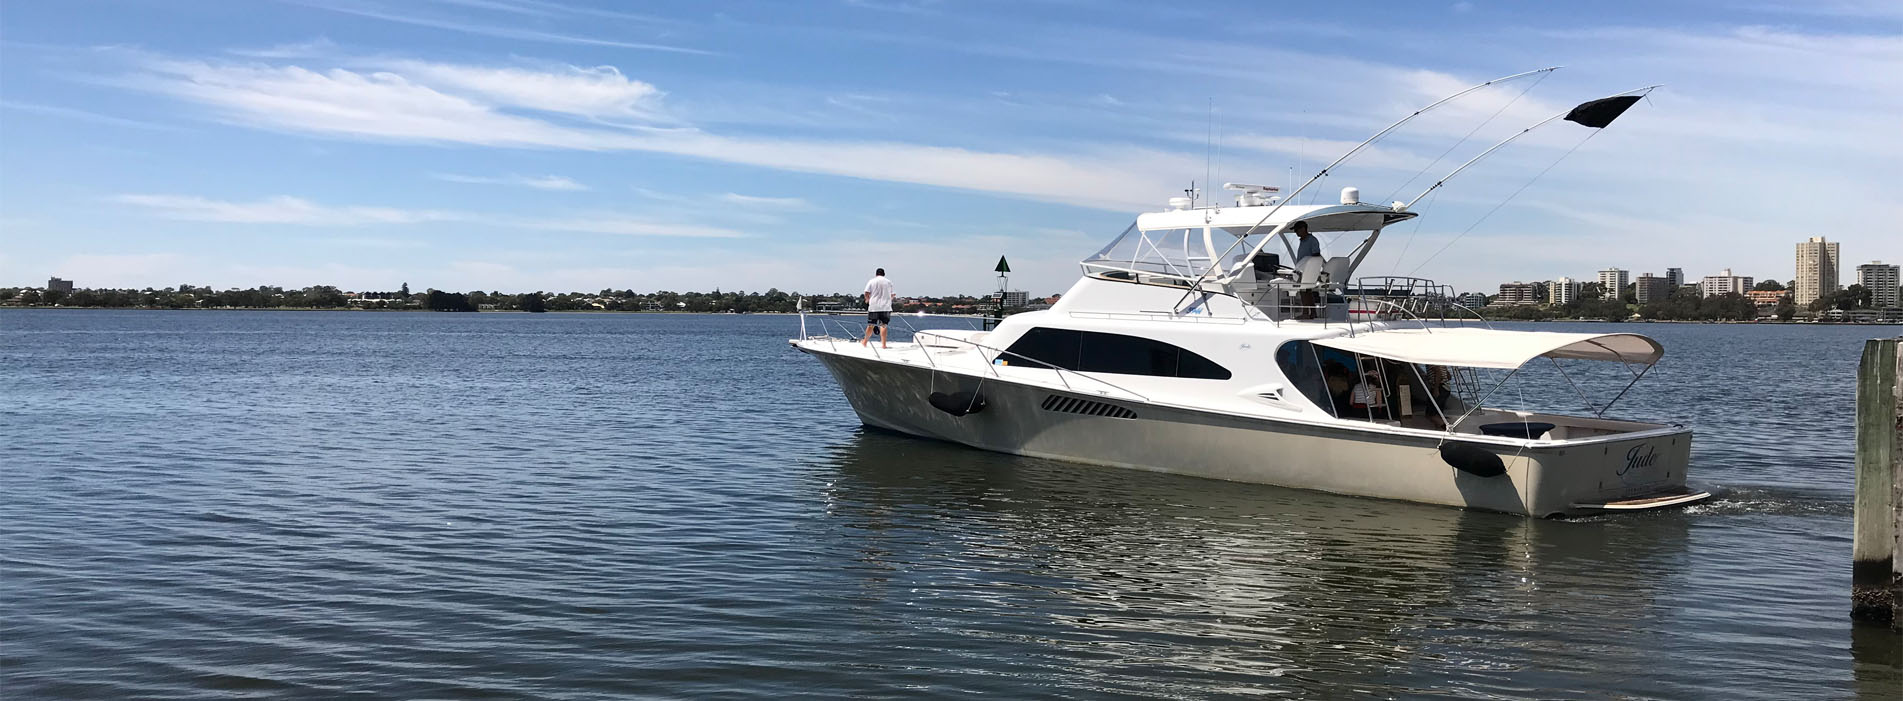 JUDE Boat charters perth luxury City